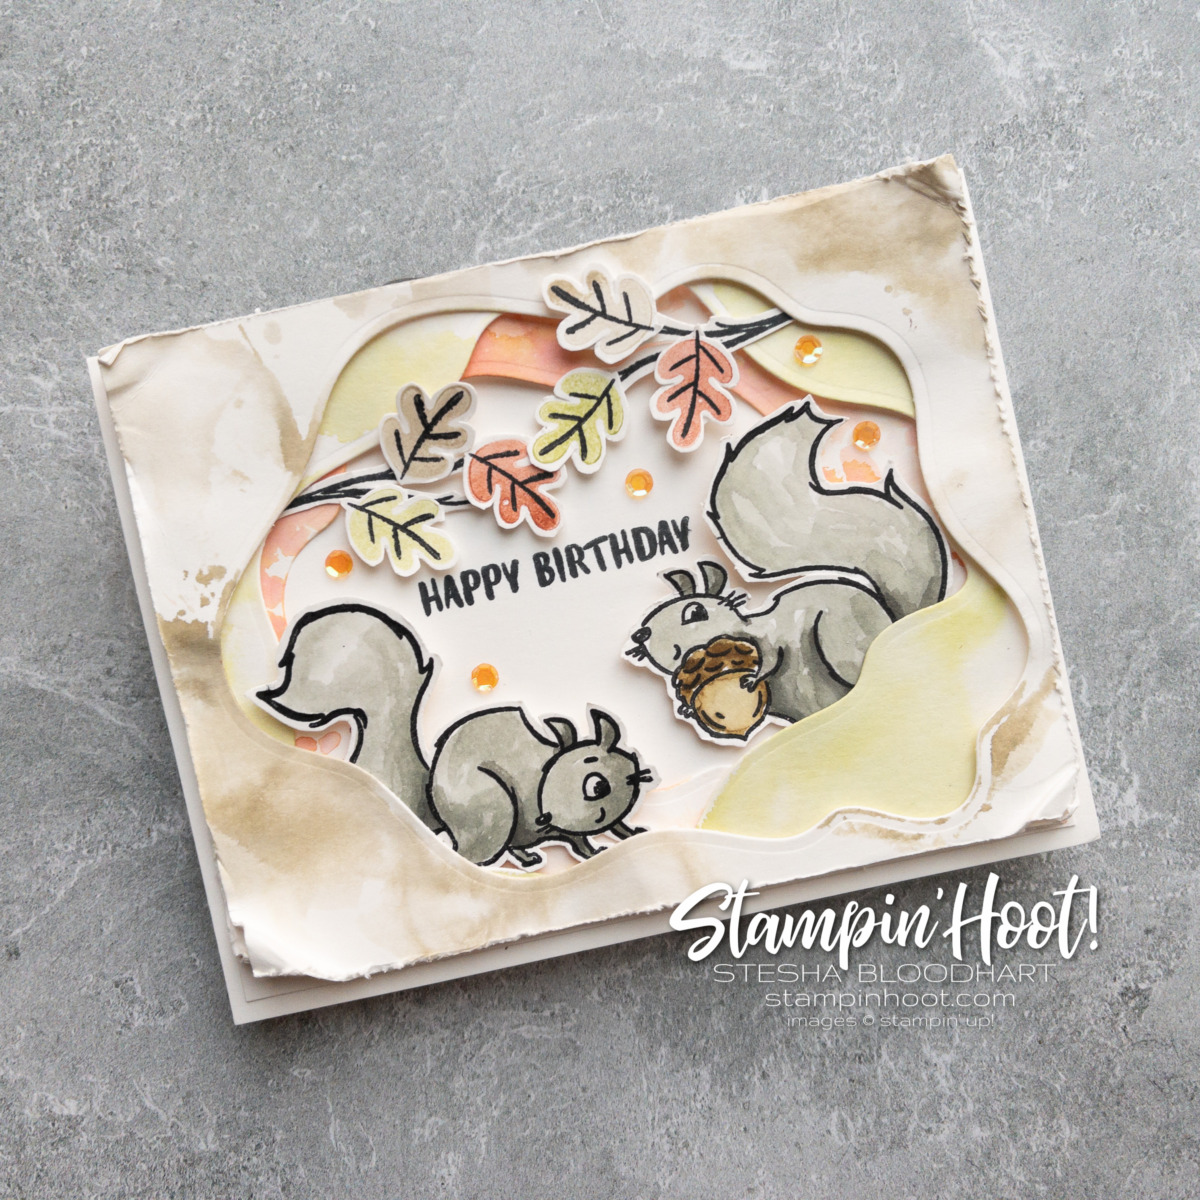 Create this Happy Birthday Card using the Nuts About Squirrels Stamp Set and Layering Diorama Dies. Stesha Bloodhart, Stampin' Hoot!